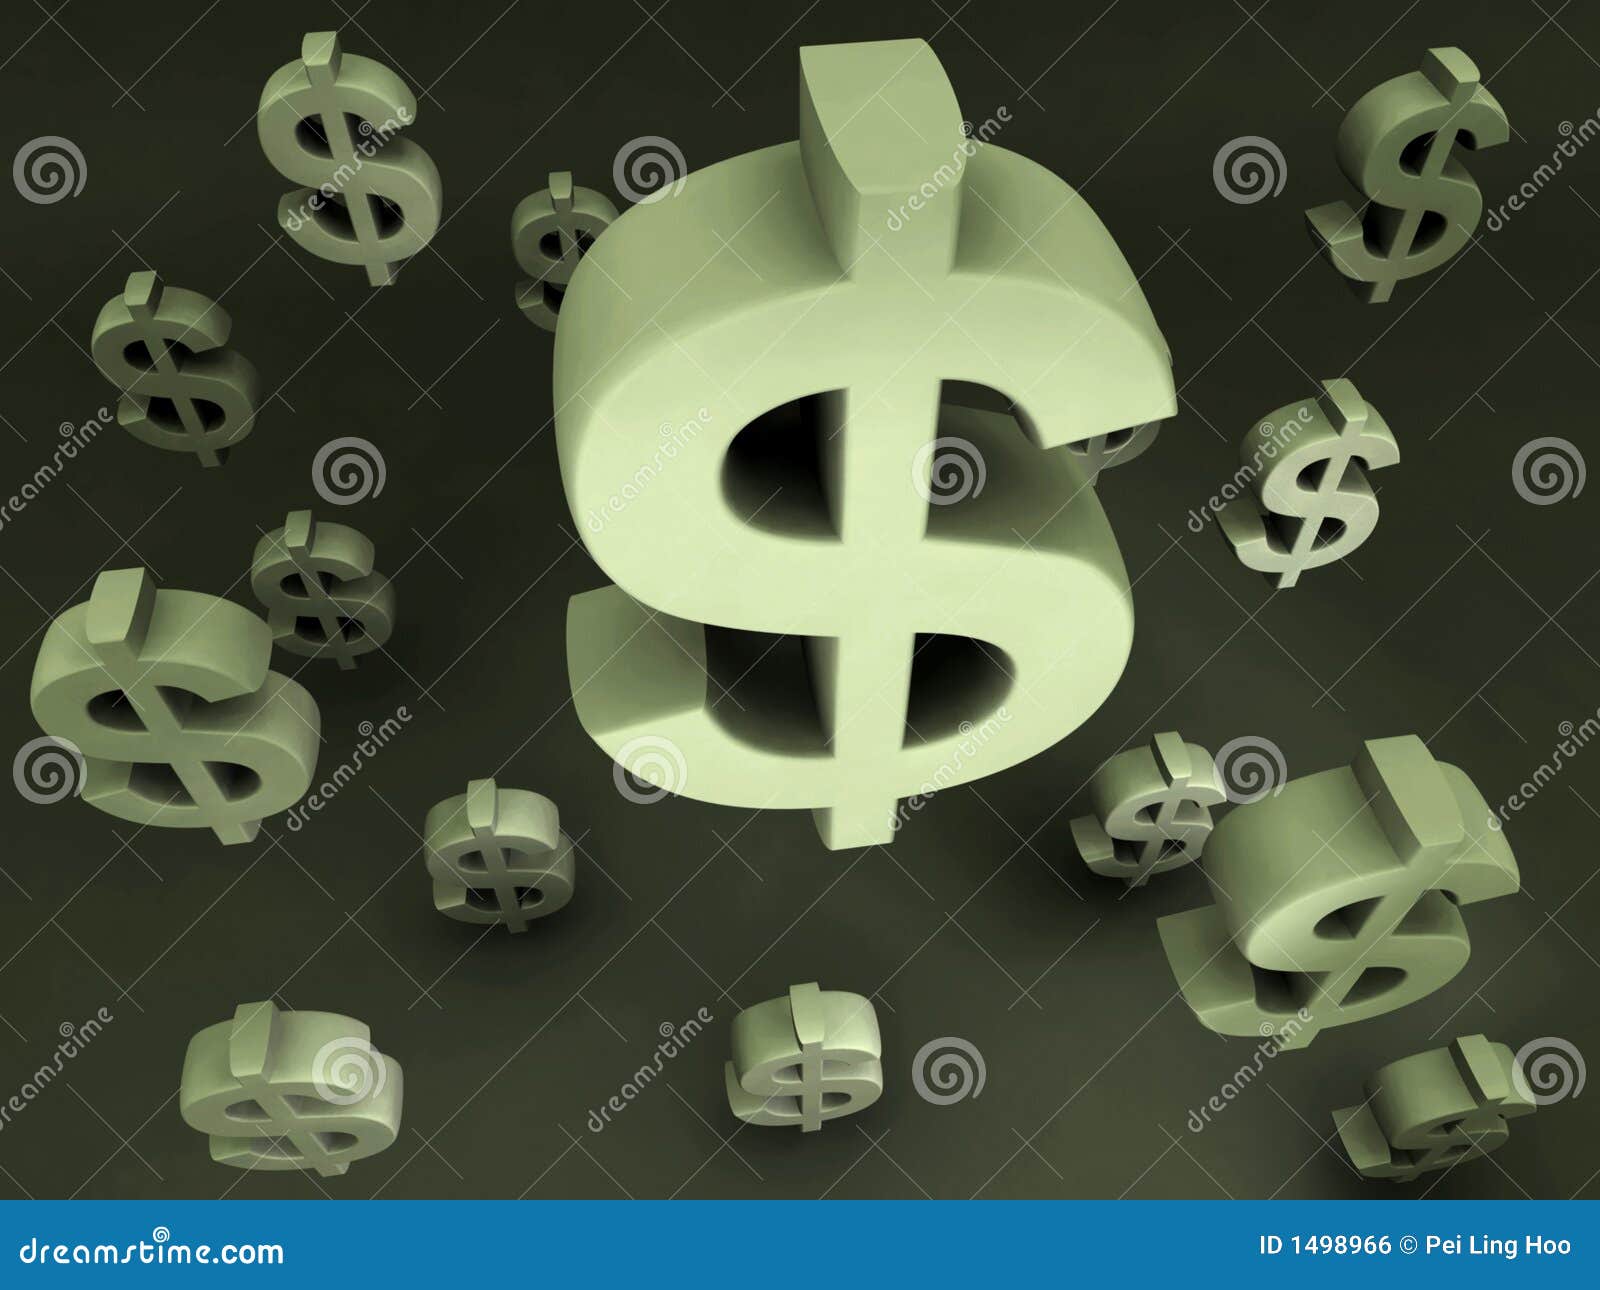 clipart flying dollar sign - photo #7